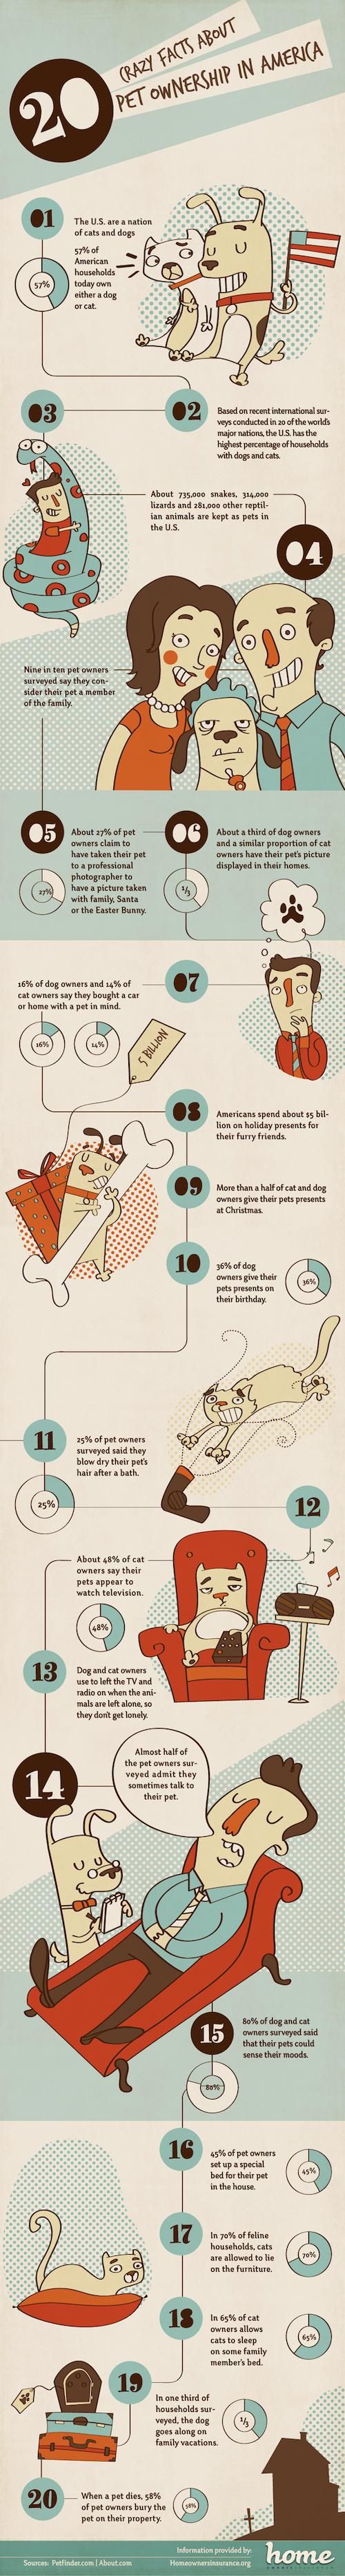 20 Facts About Pet Owners | Daily Infographic